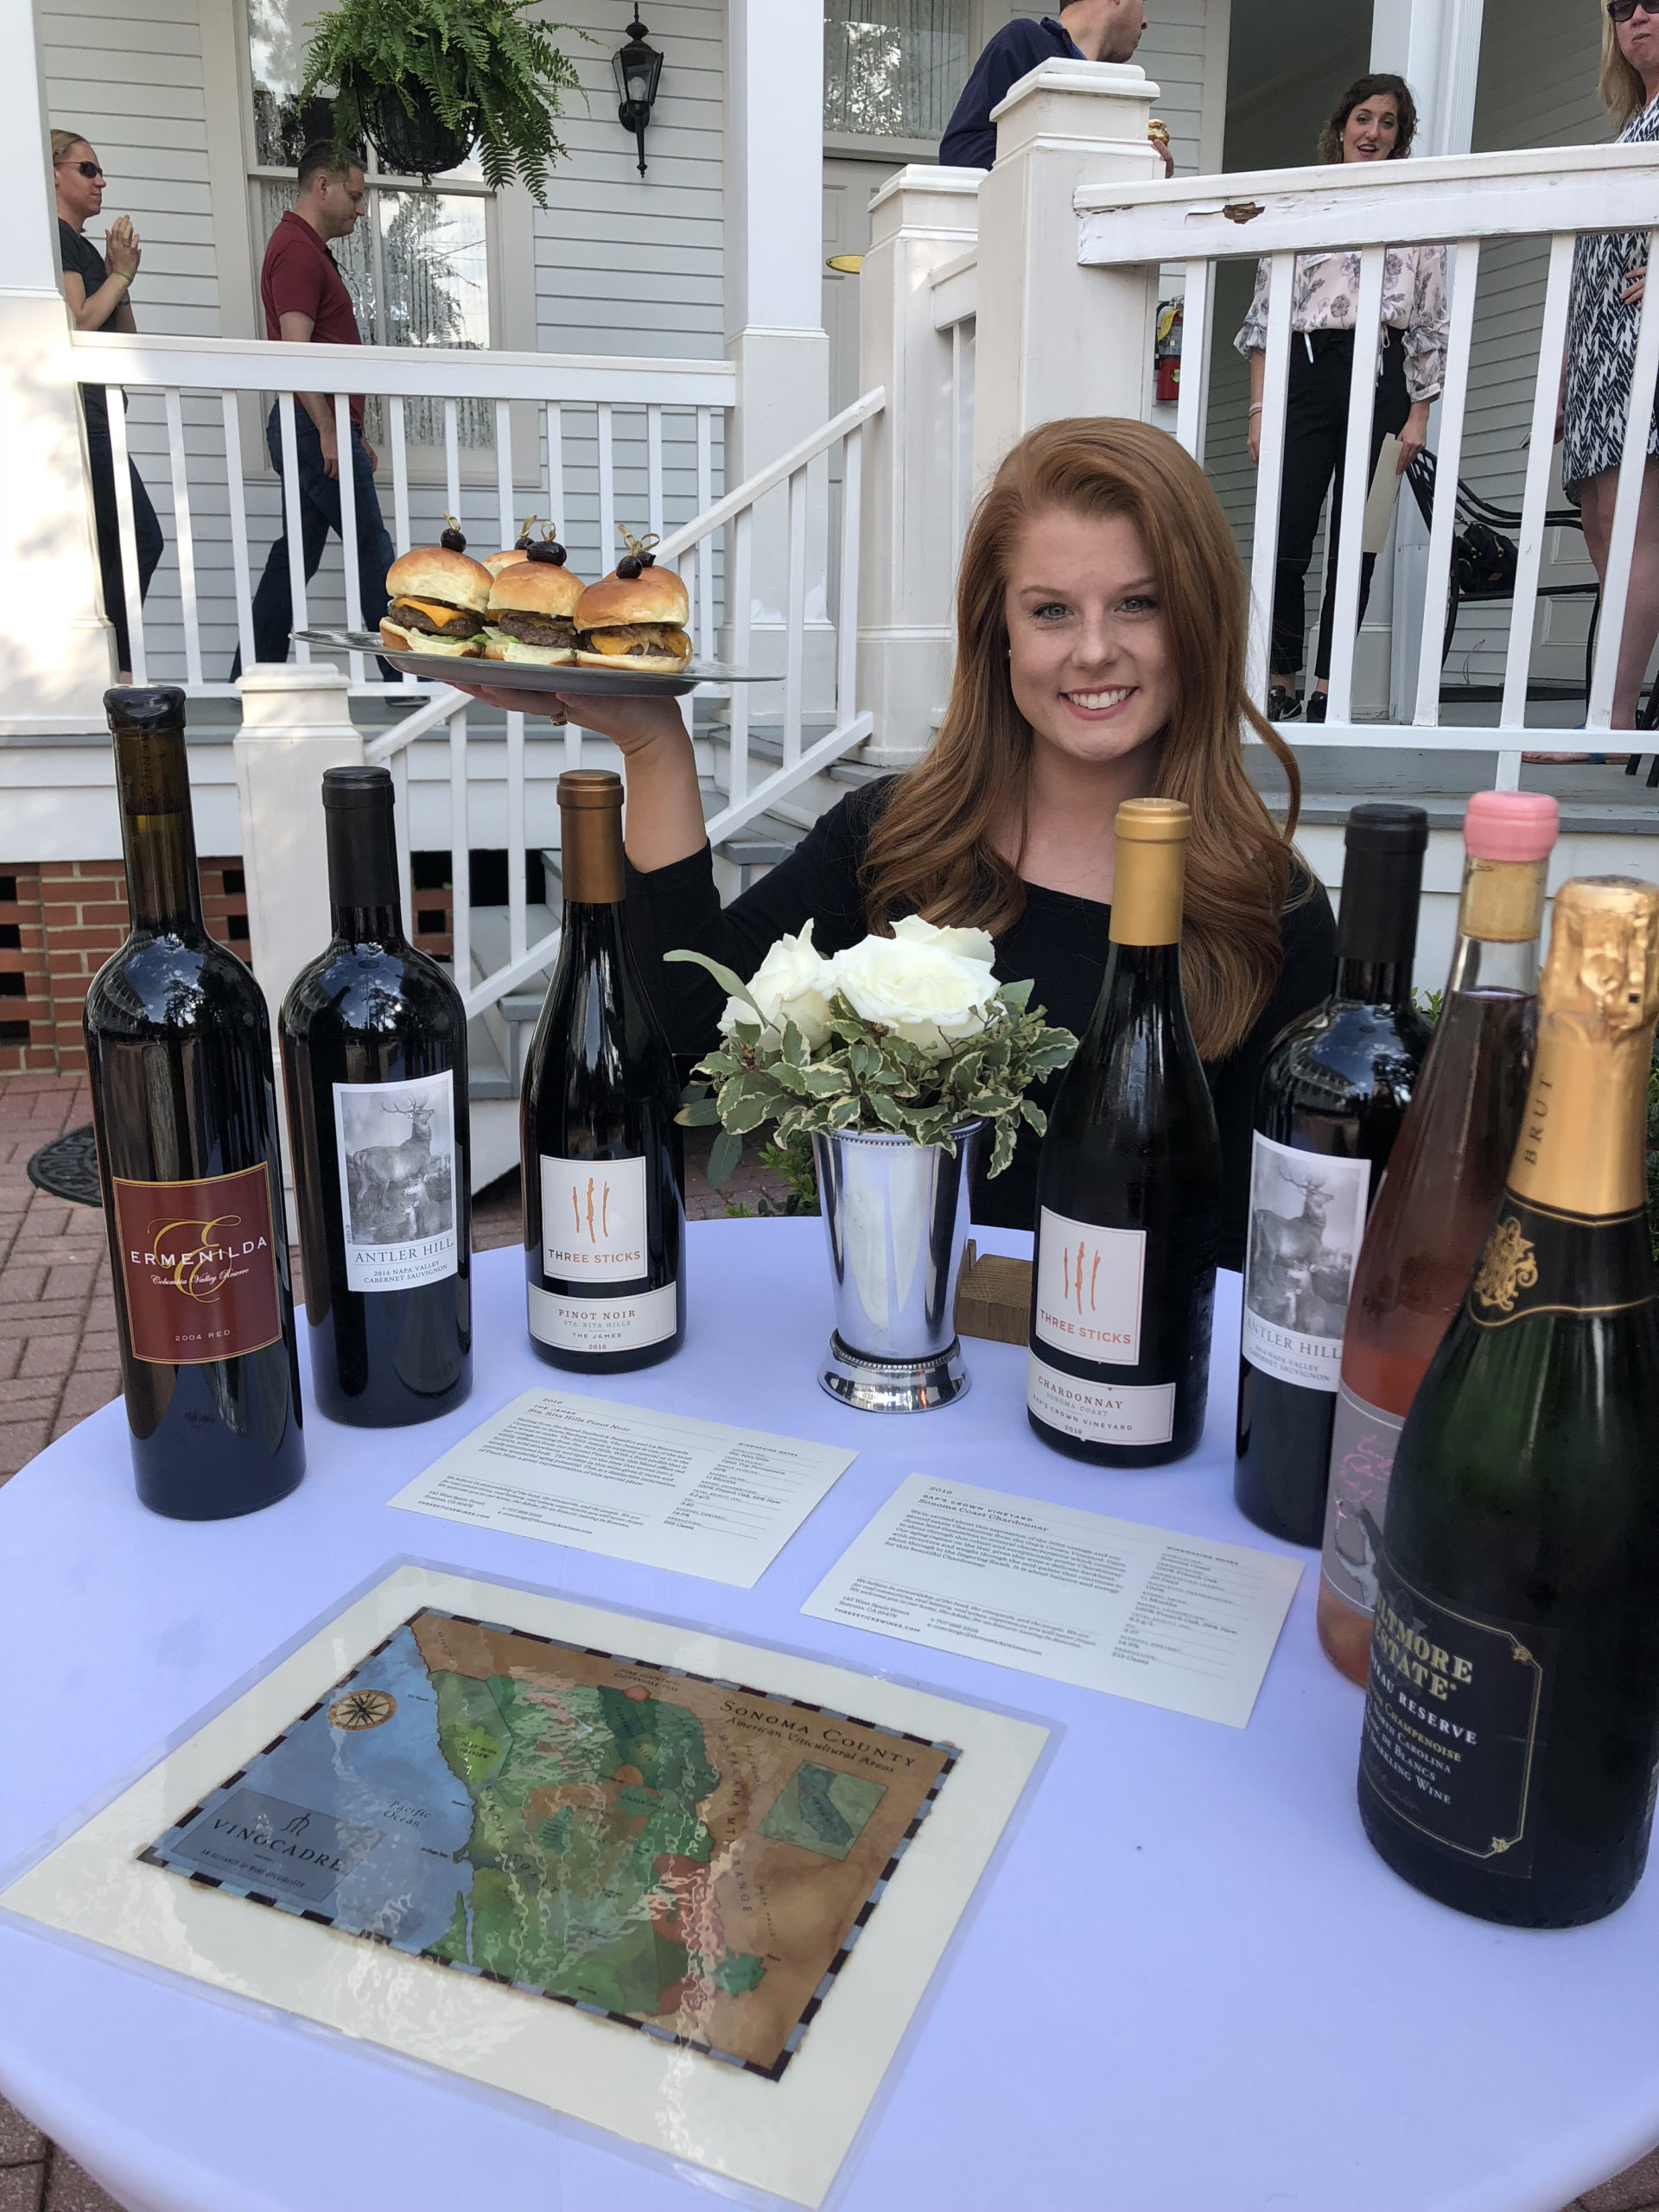 Serving Food and Wine Outdoors - VinoCadre